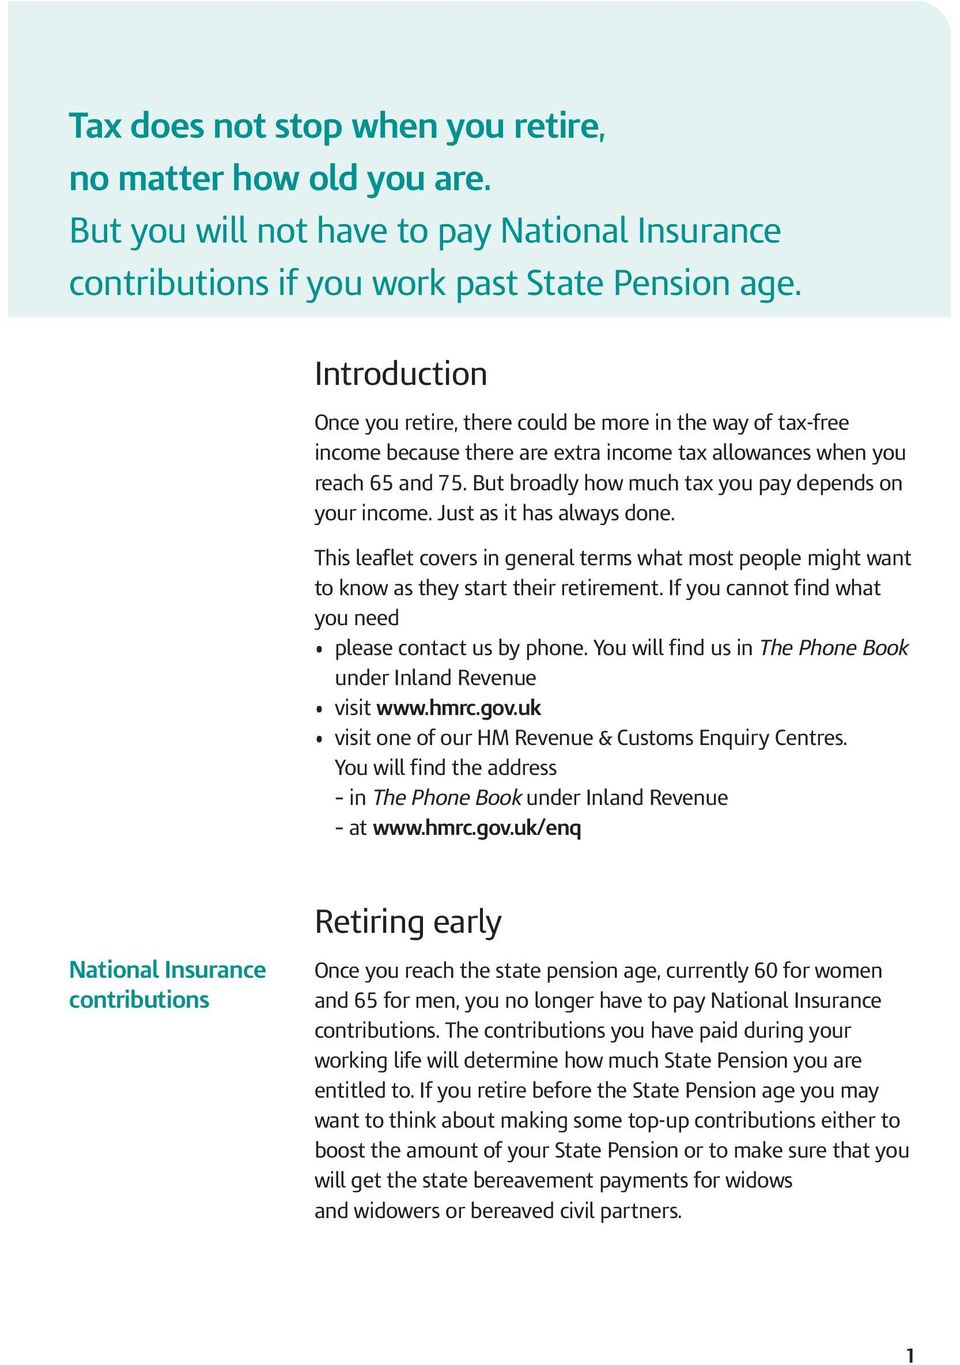 But broadly how much tax you pay depends on your income. Just as it has always done. This leaflet covers in general terms what most people might want to know as they start their retirement.